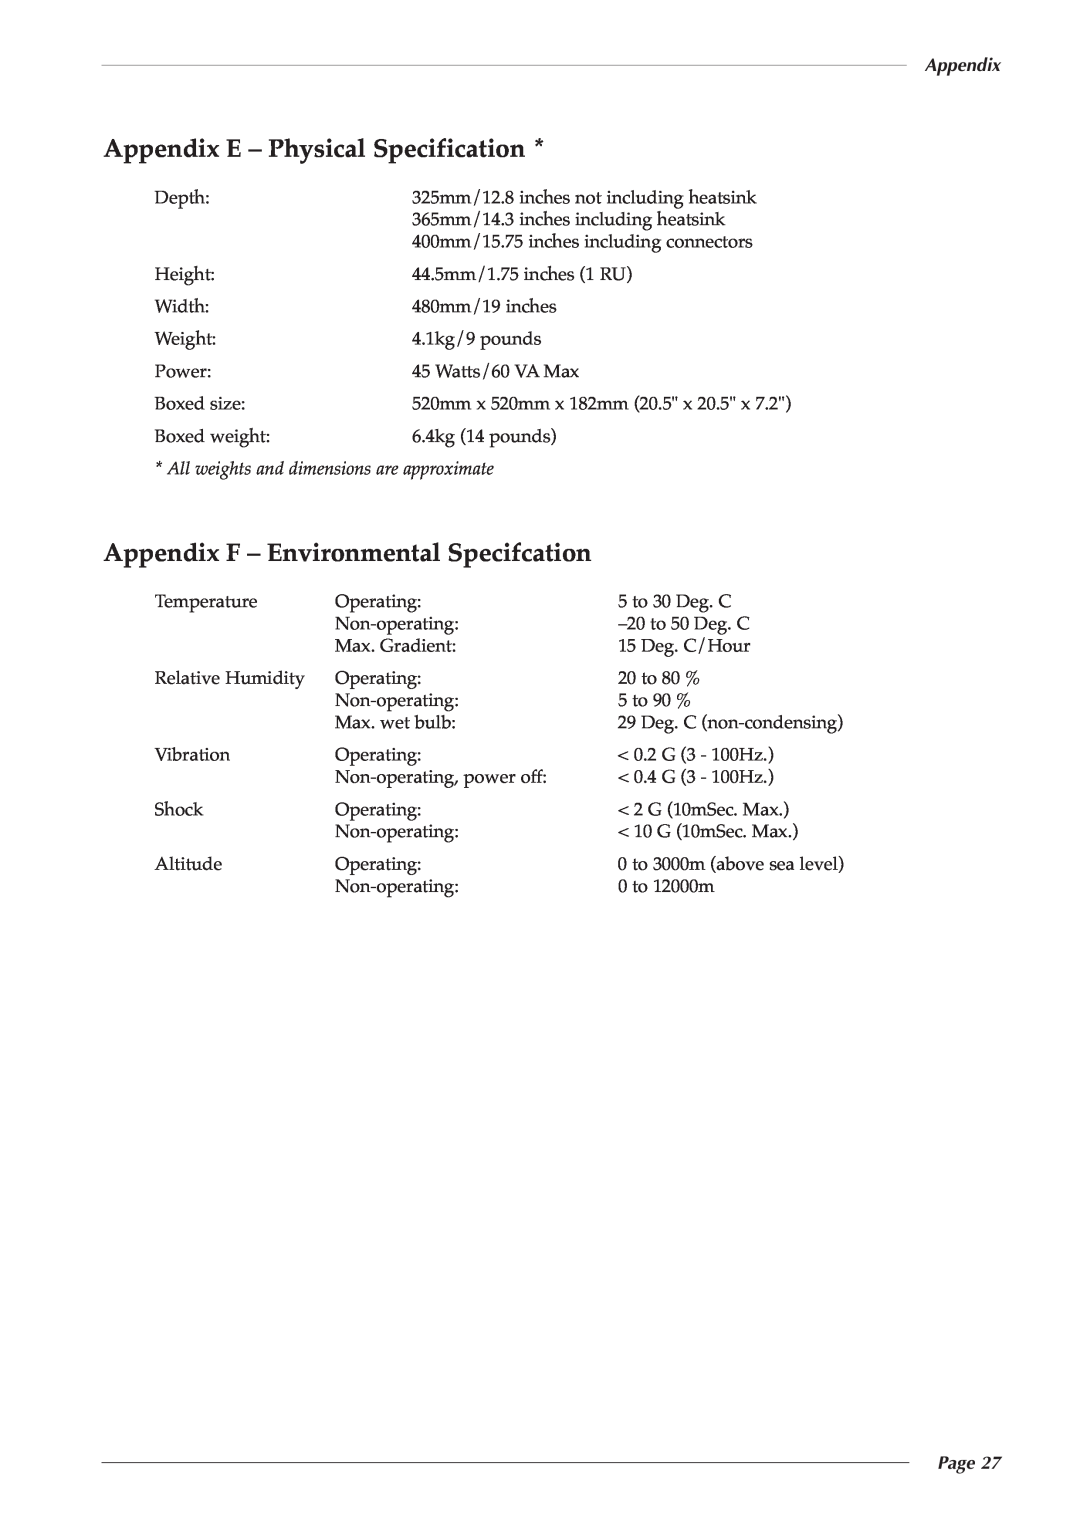 Solid State Logic 82S6XL020E Appendix E - Physical Specification, Appendix F - Environmental Specifcation, Page 